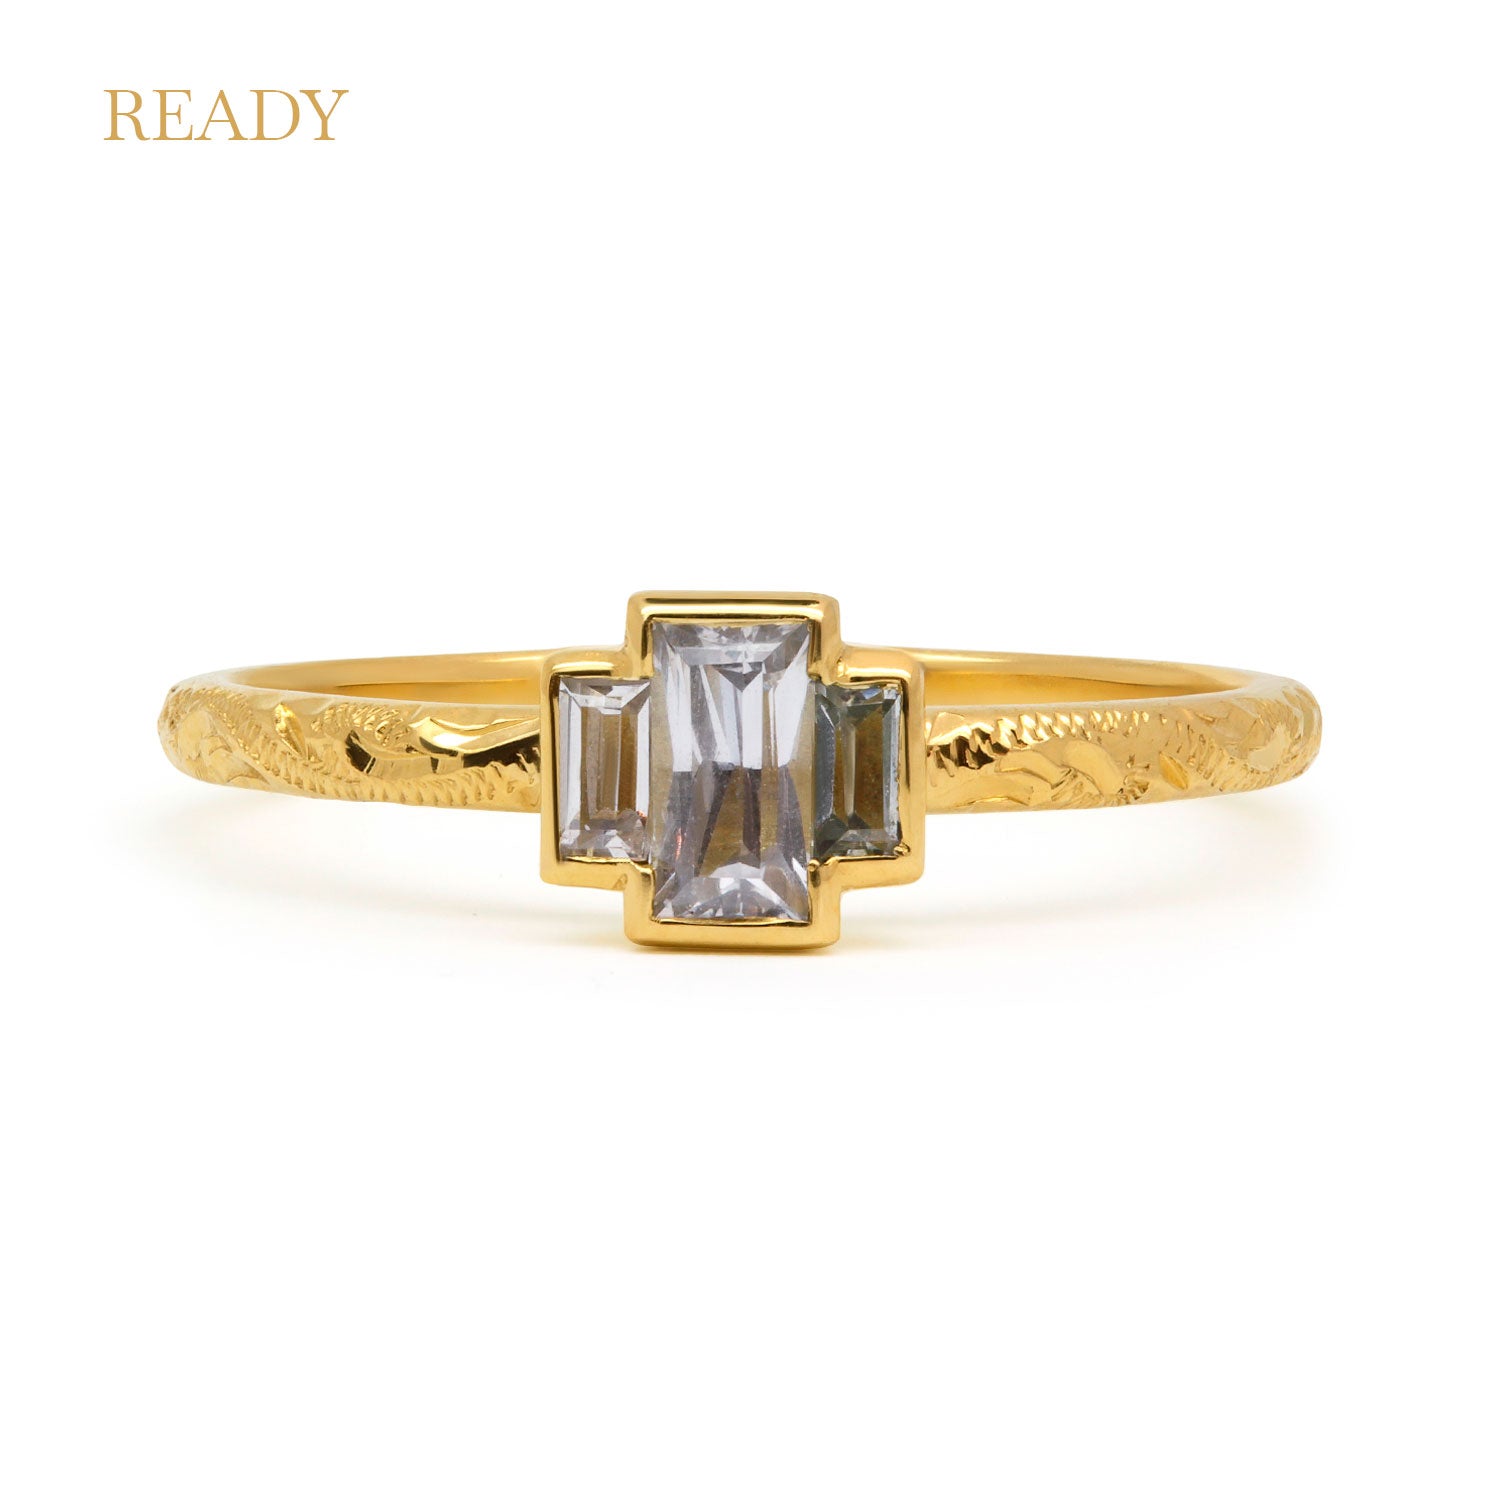 Fancy Hera ethical trilogy engagement ring in 18ct recycled yellow gold, hand-engraved and set with three grey baguette sapphires of fair-traded and traceable Sri Lankan provenance